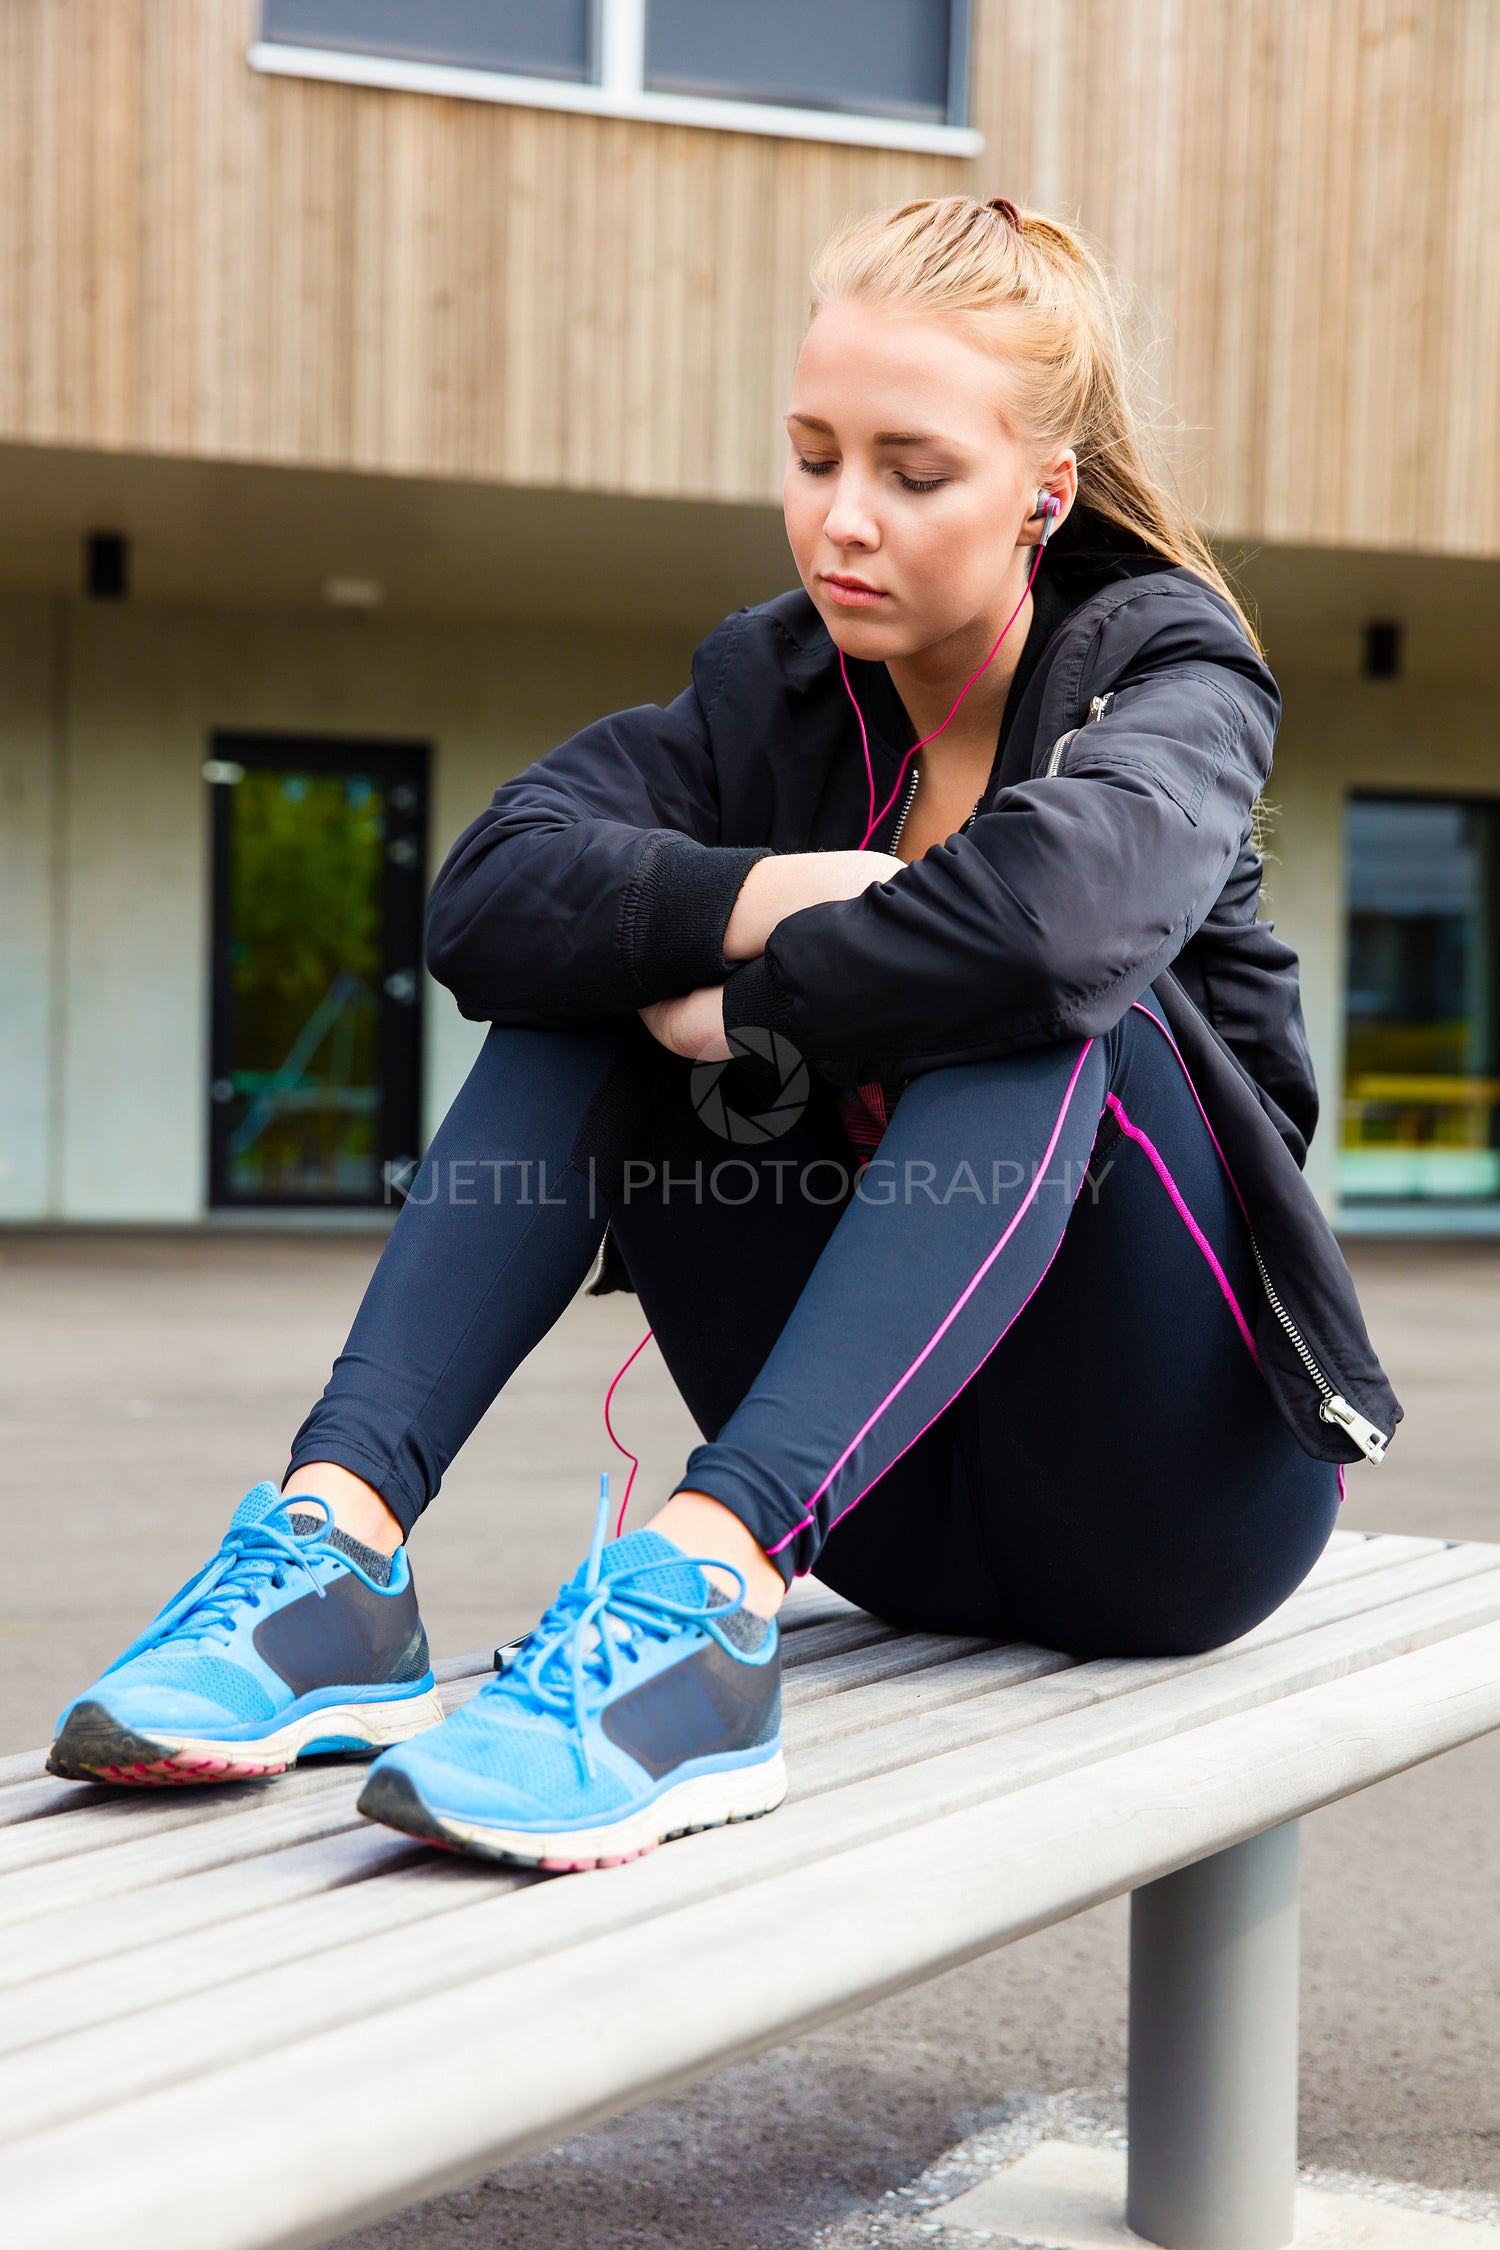 Relaxed Woman In Sportswear Listening To Music On Bench